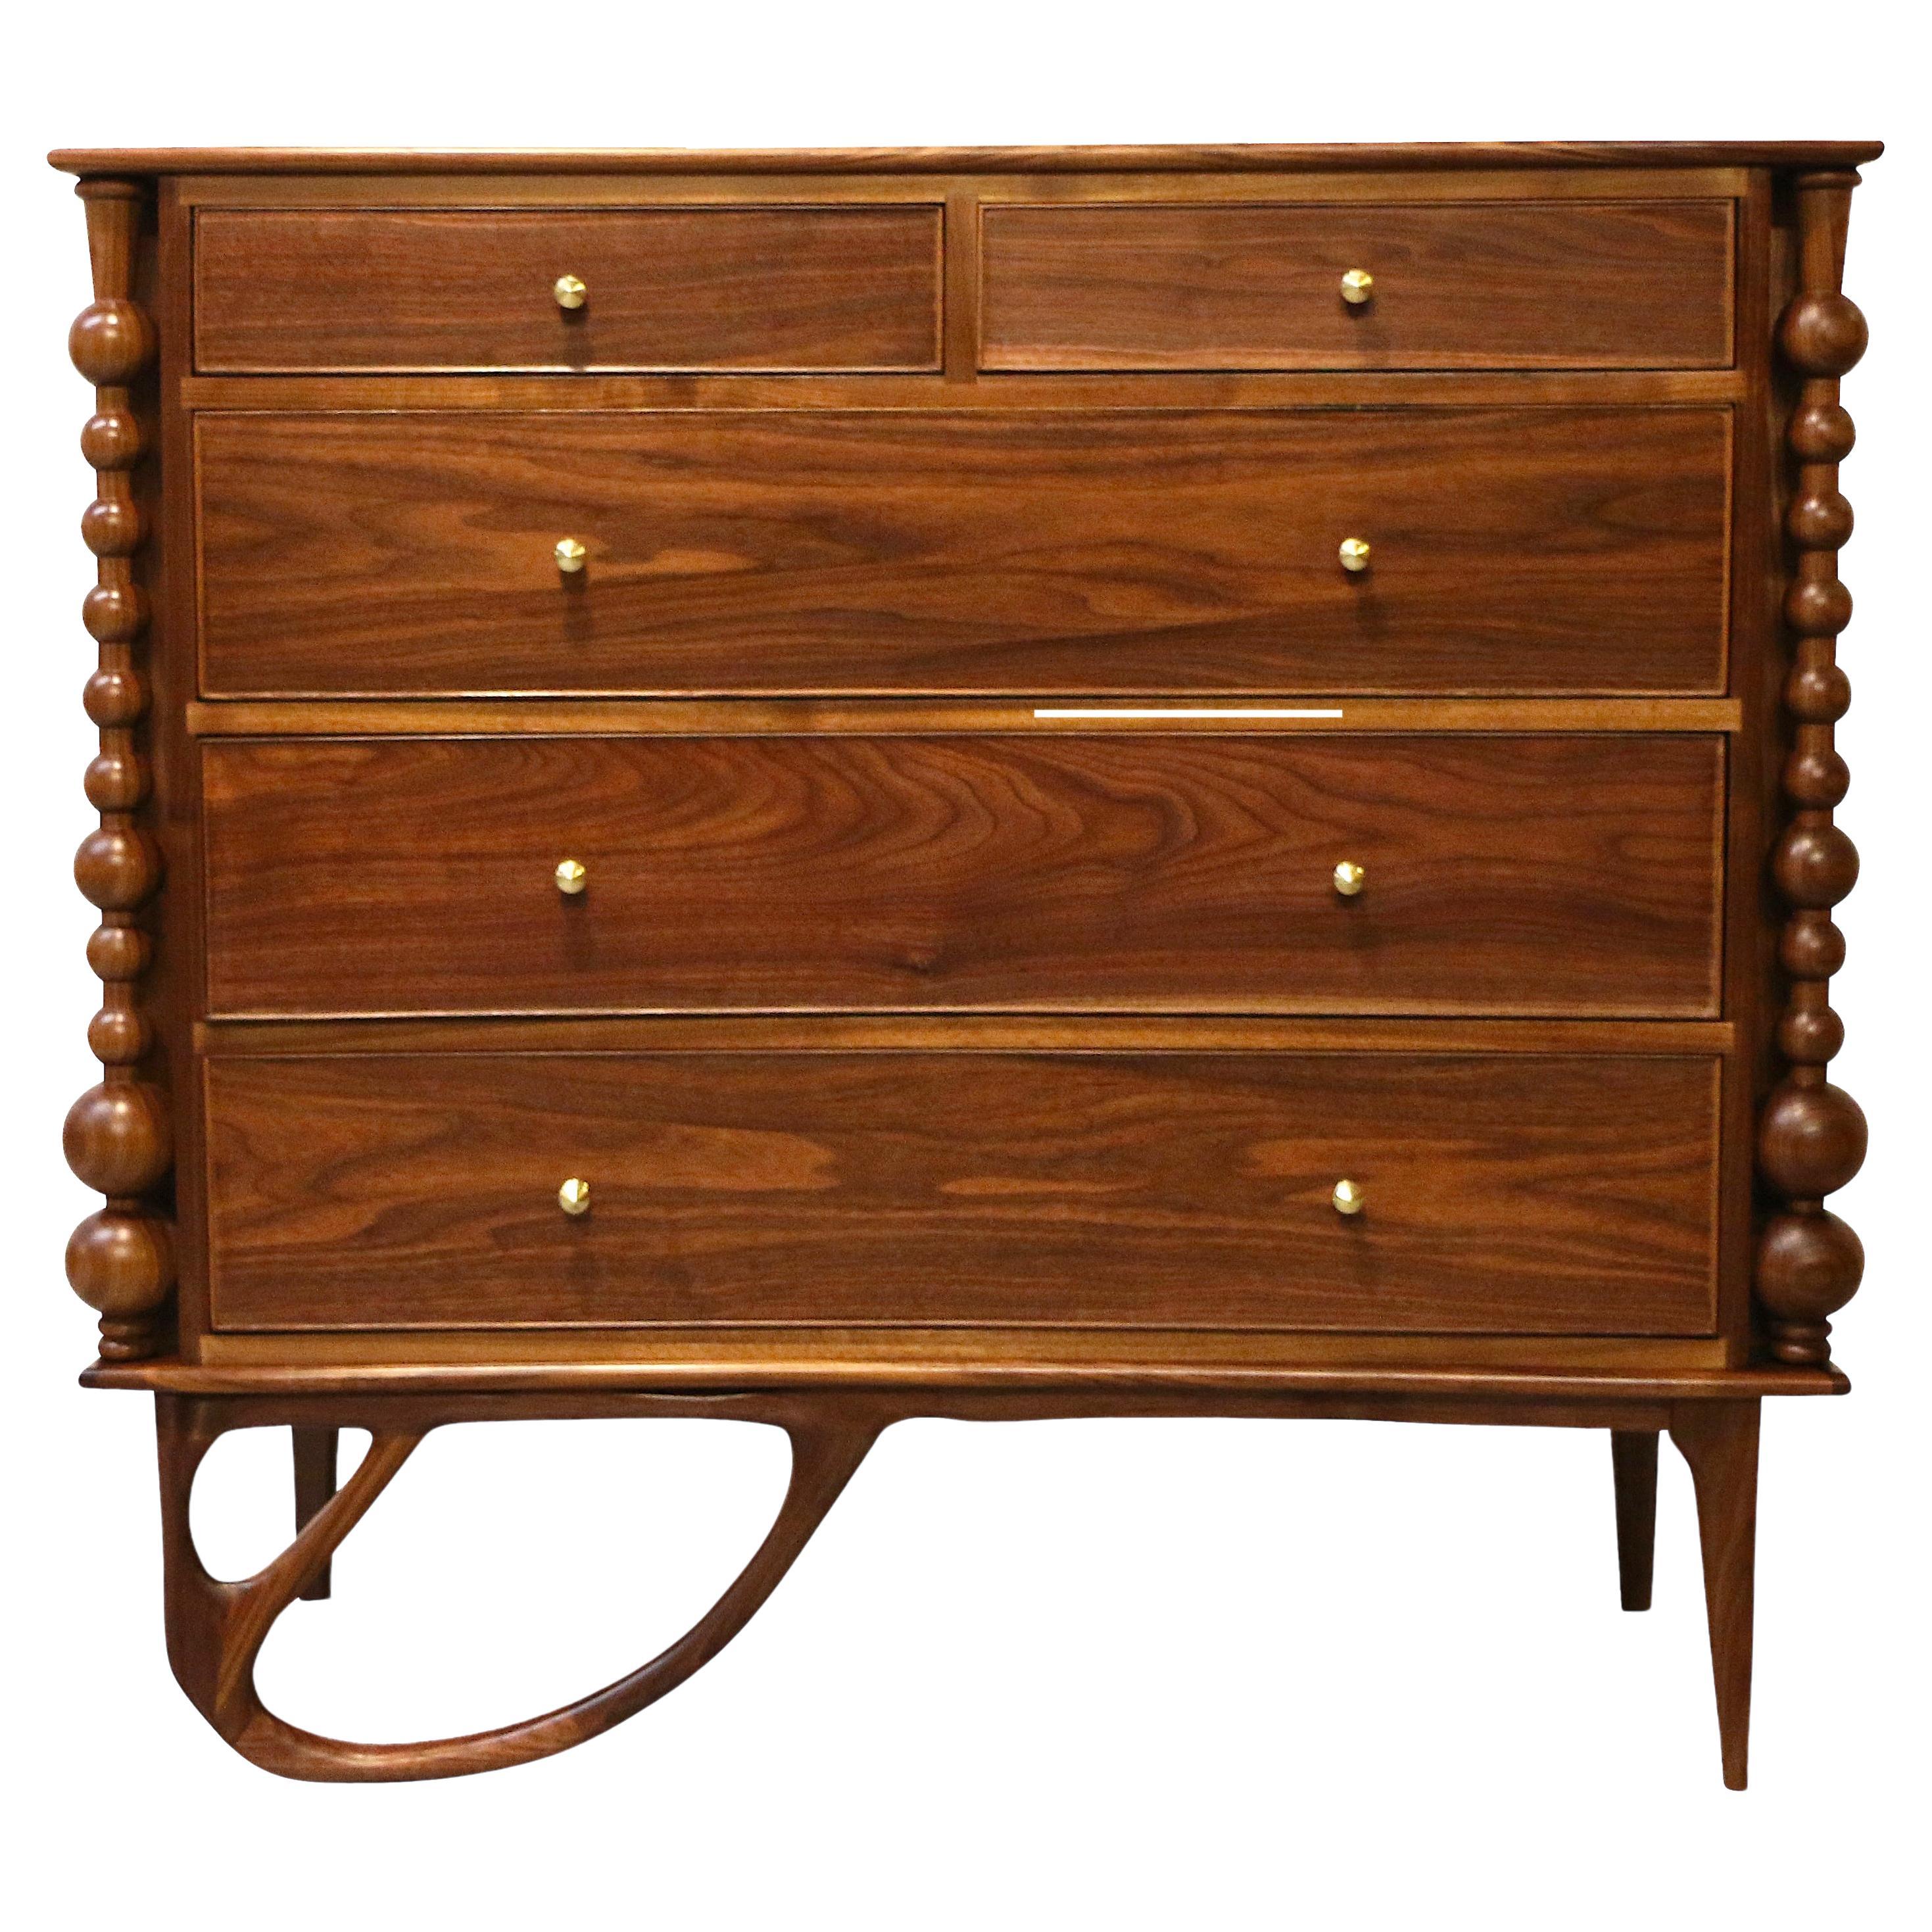 What’s the difference between a chest and dresser?